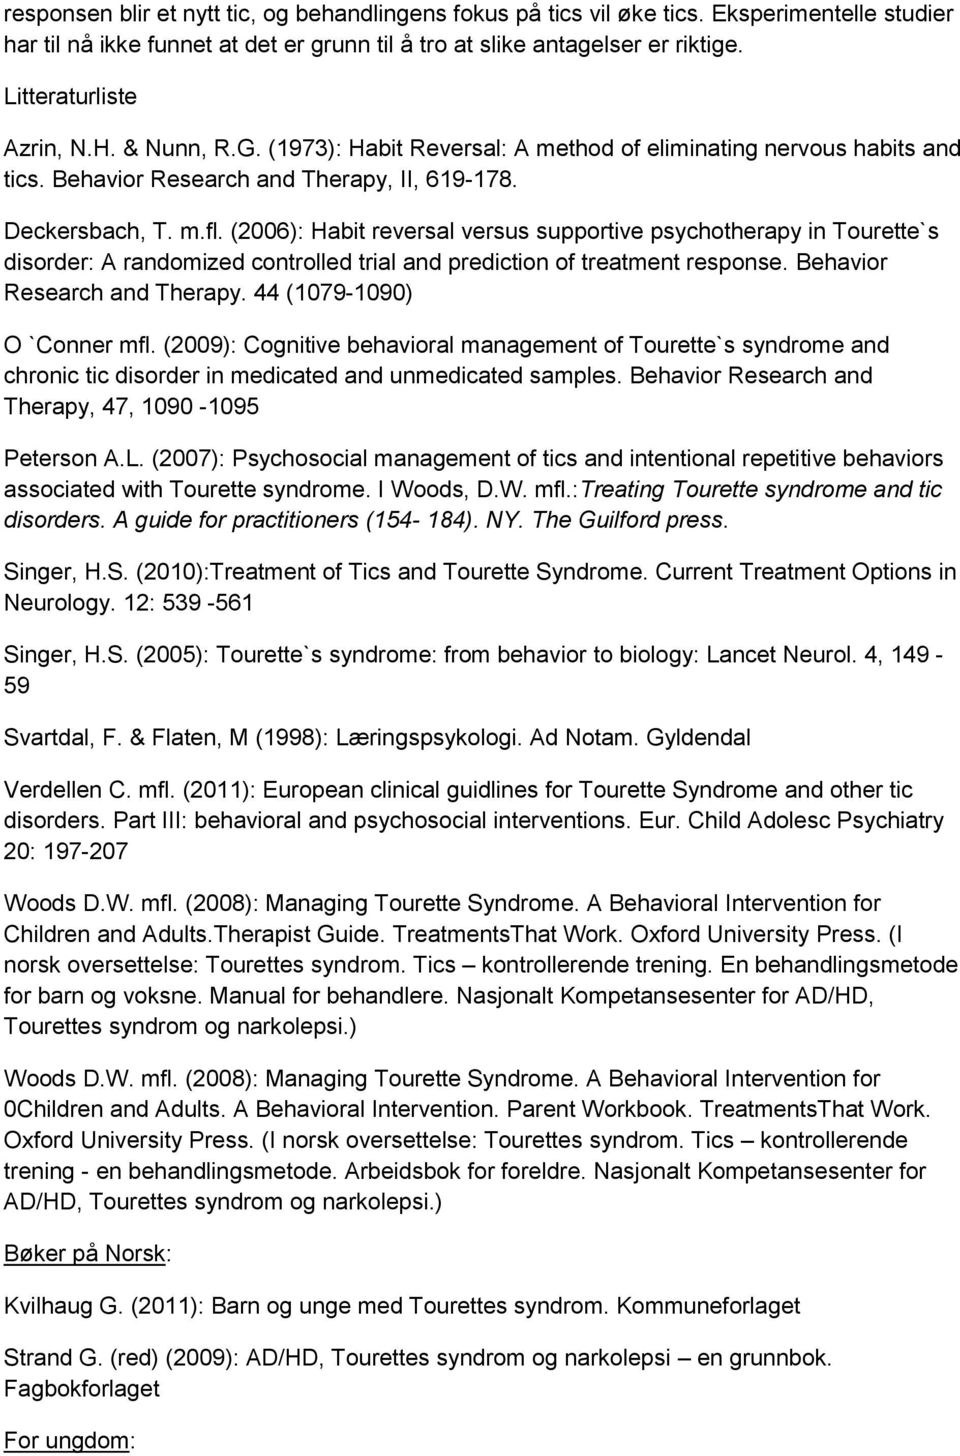 (2006): Habit reversal versus supportive psychotherapy in Tourette`s disorder: A randomized controlled trial and prediction of treatment response. Behavior Research and Therapy.